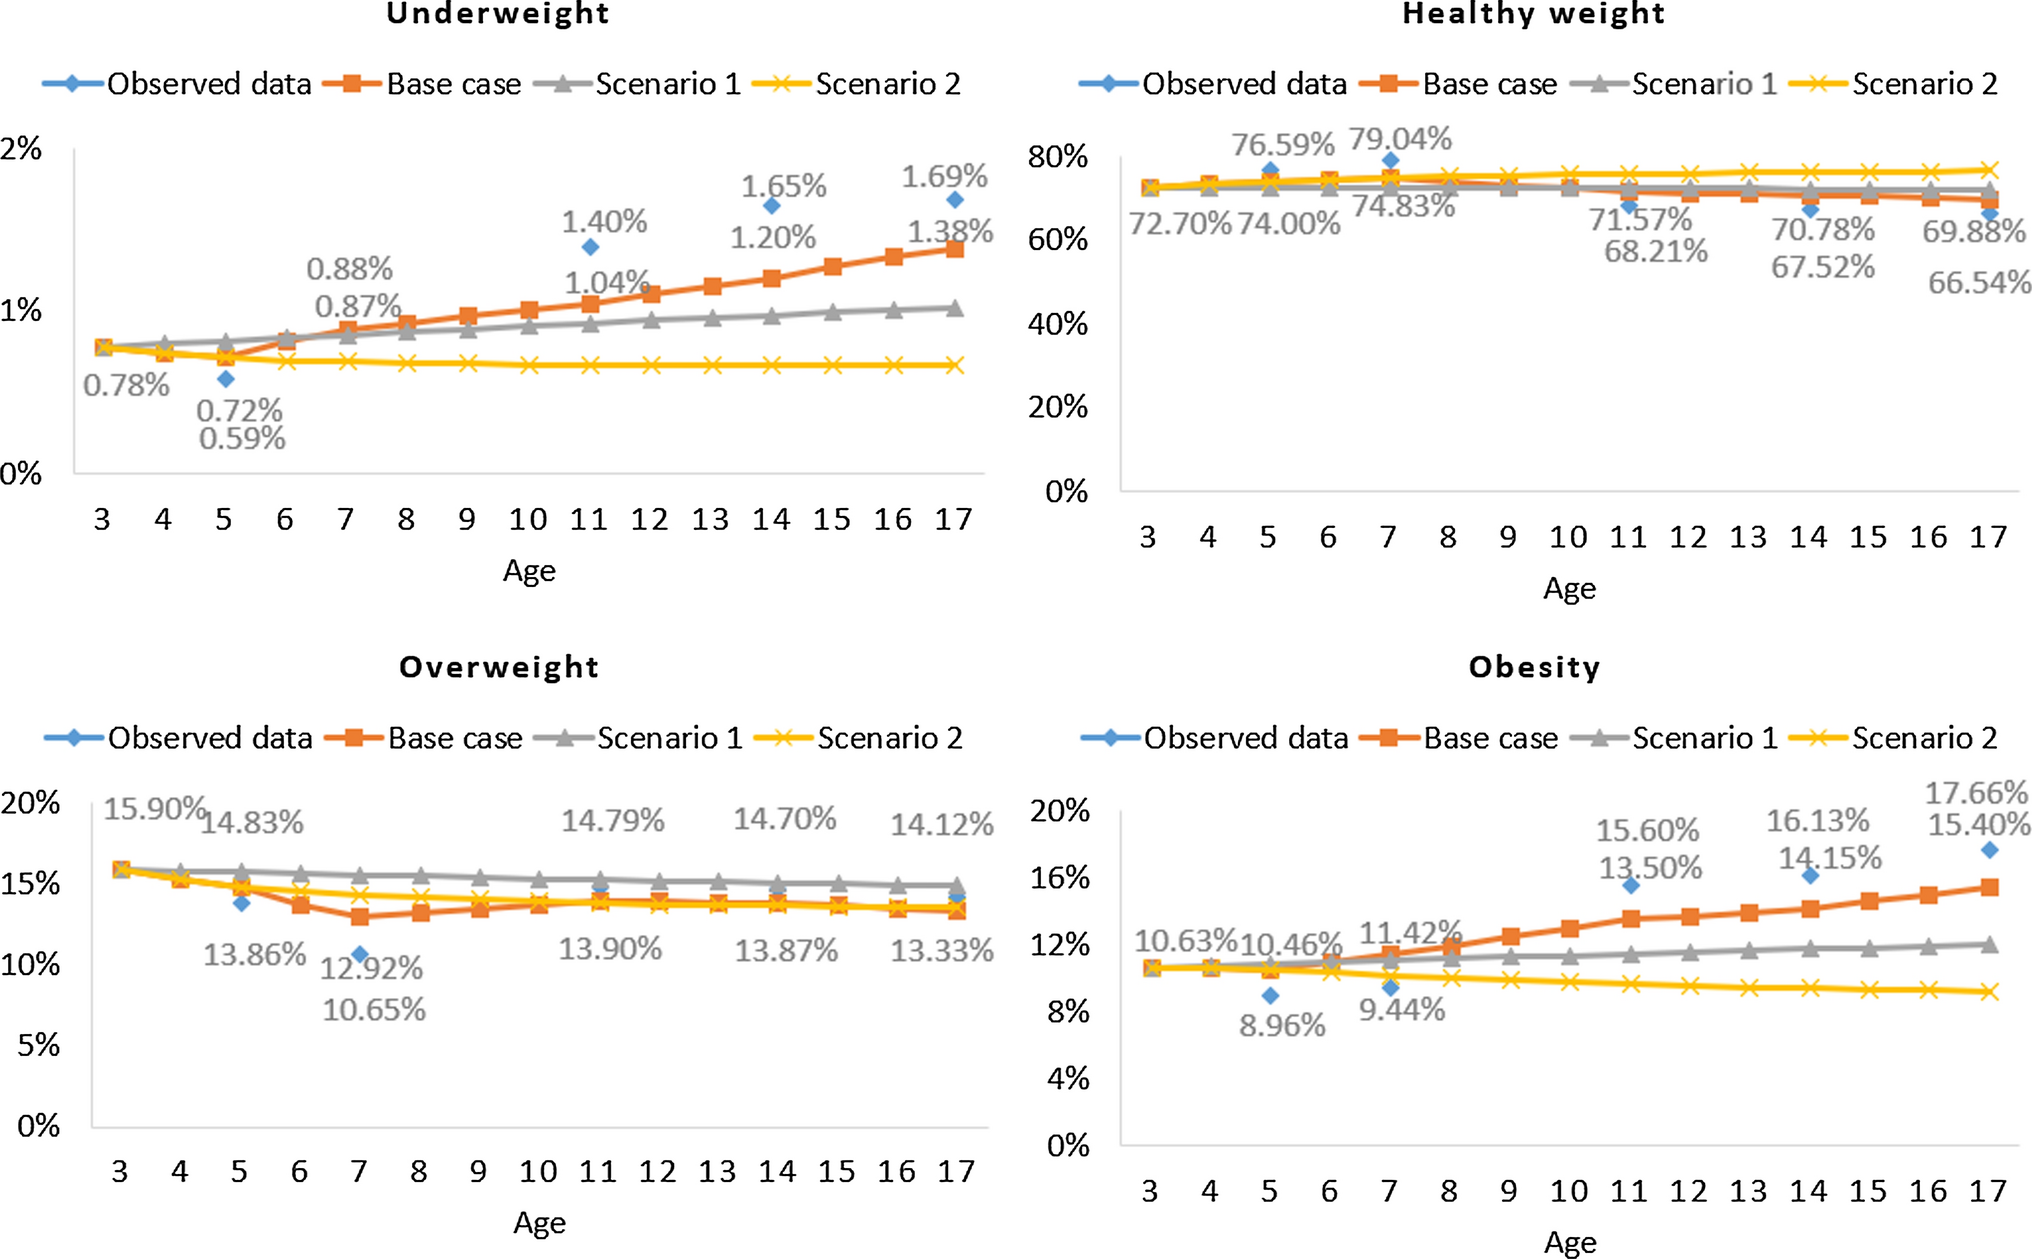 Childhood Transitions Between Weight Status Categories: Evidence from the UK Millennium Cohort Study